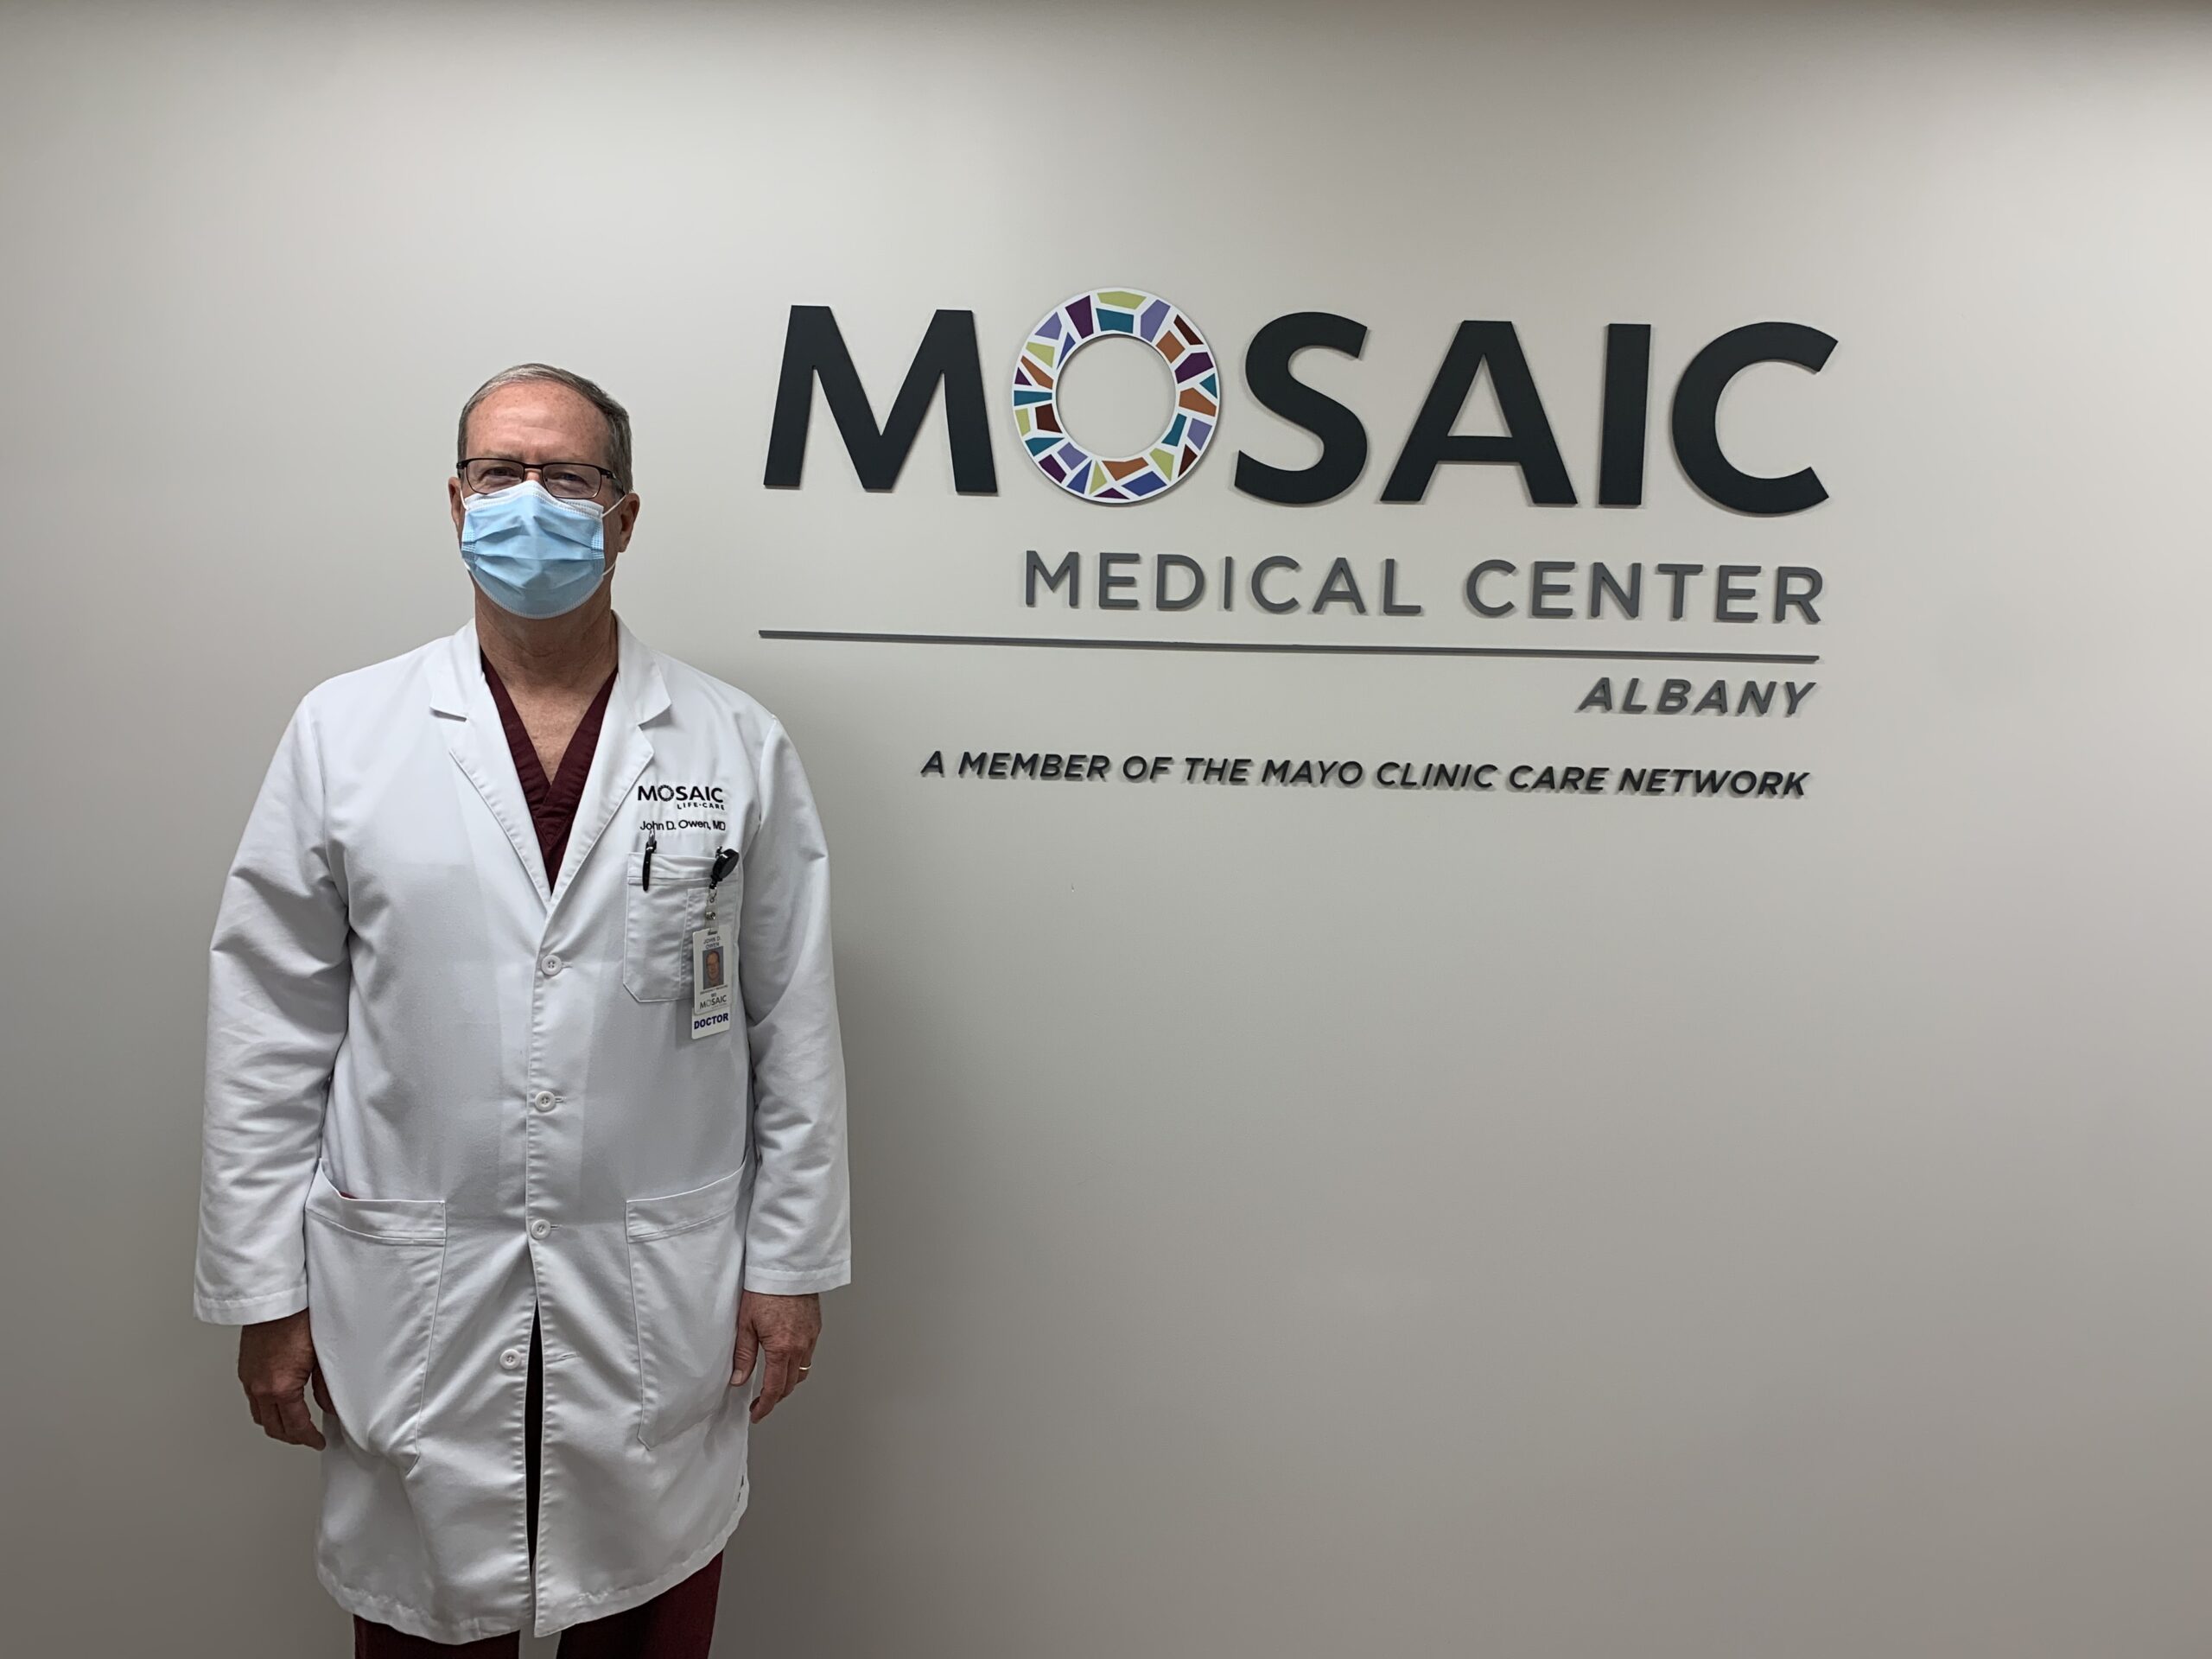 Mosaic Medical Center – Albany Receives Gift From Local Physician